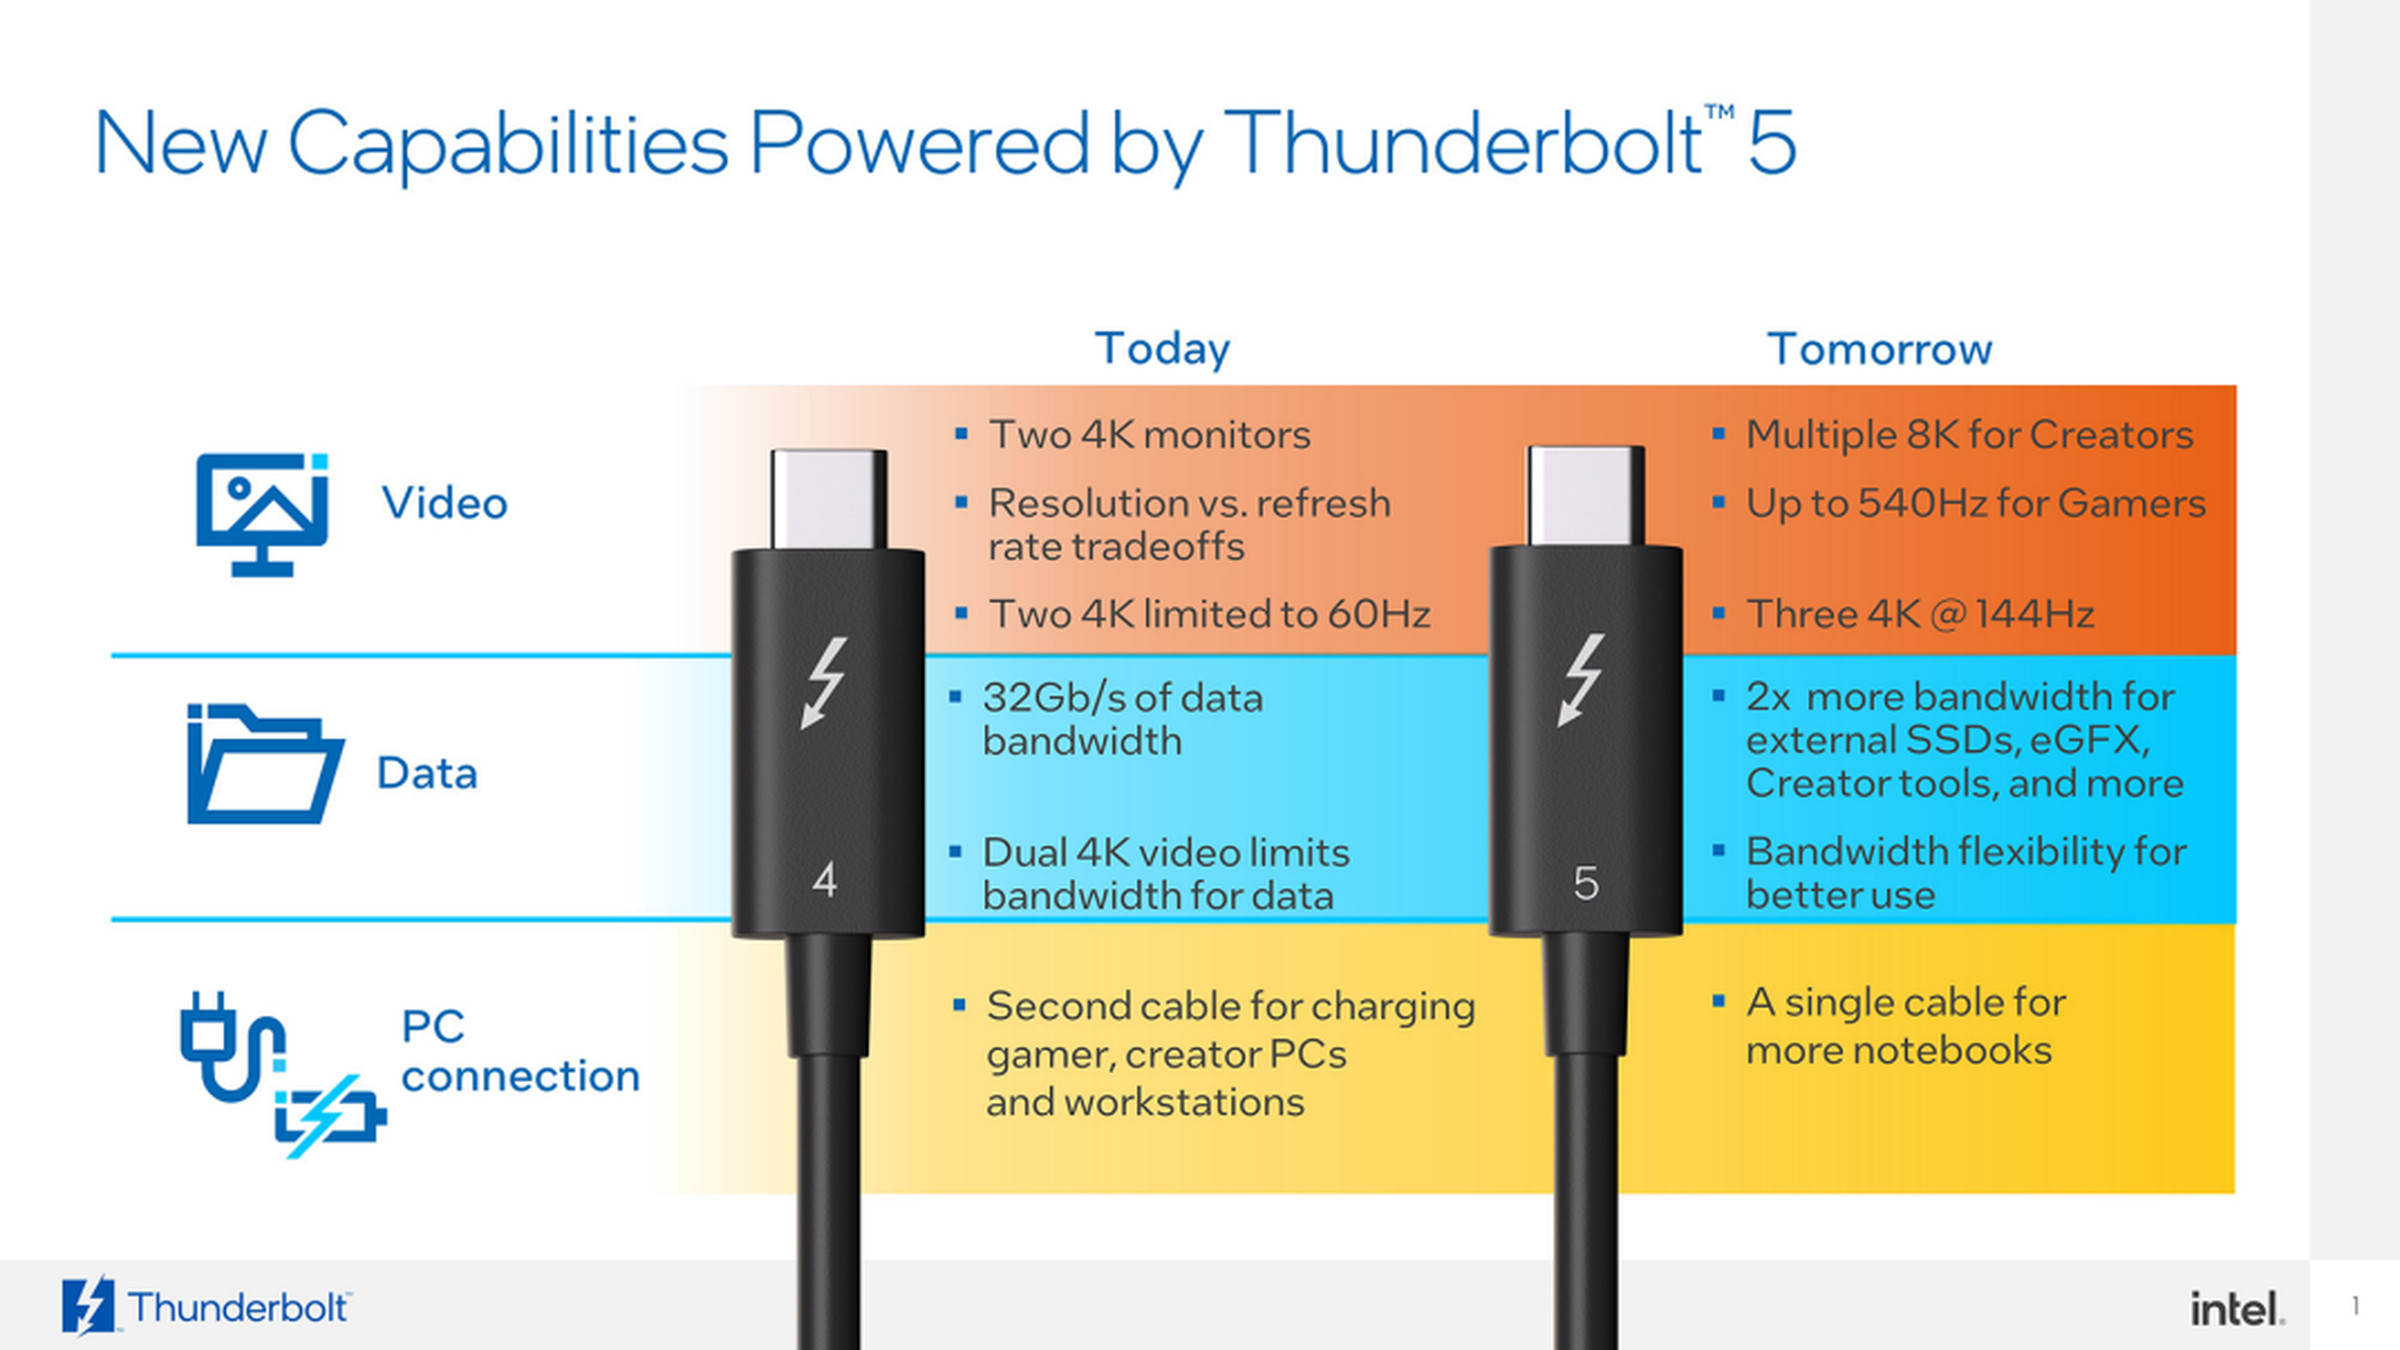 All the key video and data benefits to Thunderbolt 5.